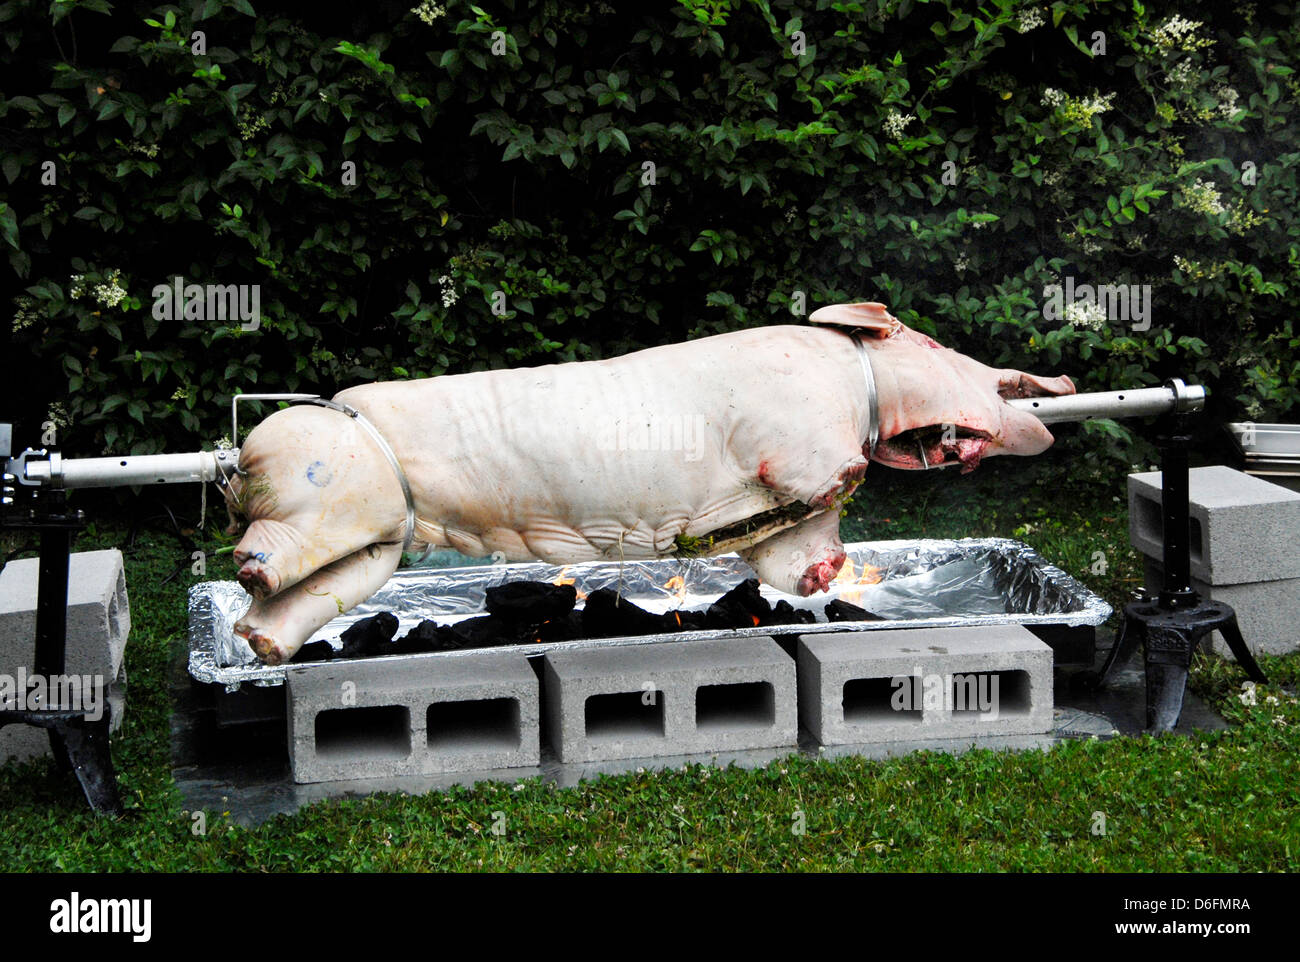 Pig on spit Stock Photo